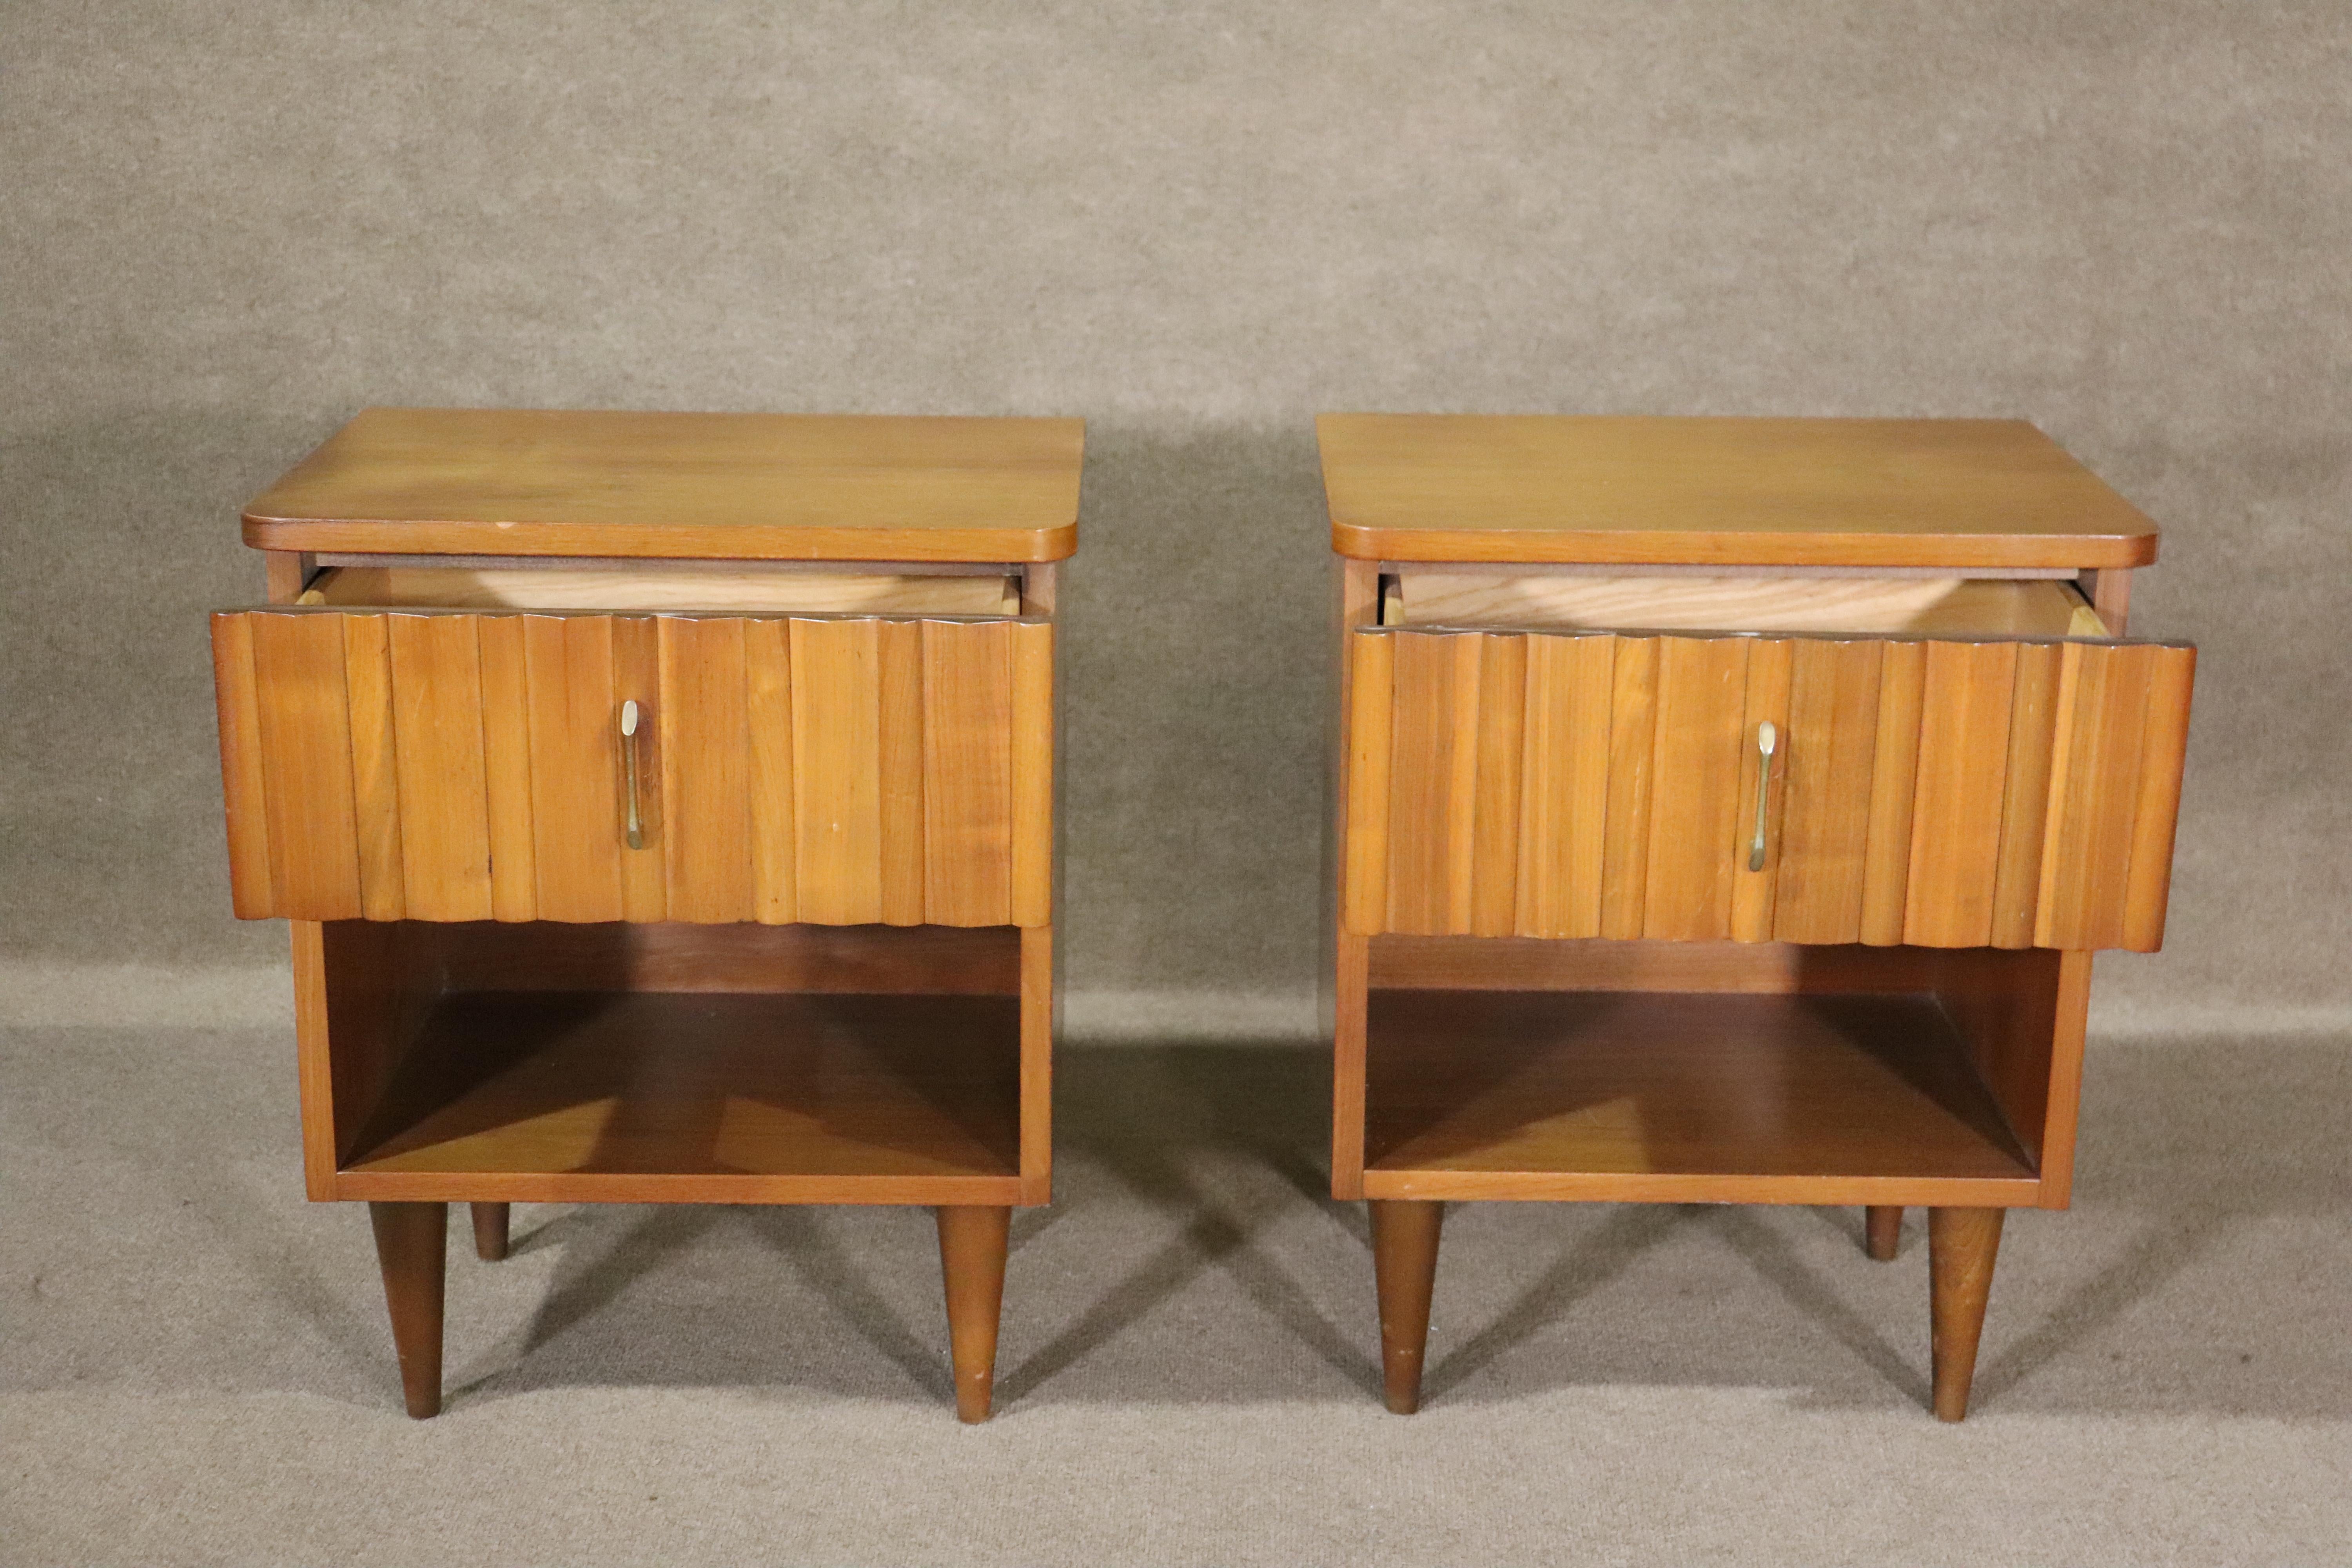 Pair of walnut wood single drawer end tables with brass handles. Produced in the 1960s by Young Manufacturing Company, featuring cone legs and sculpted front drawers.
Please confirm location NY or NJ